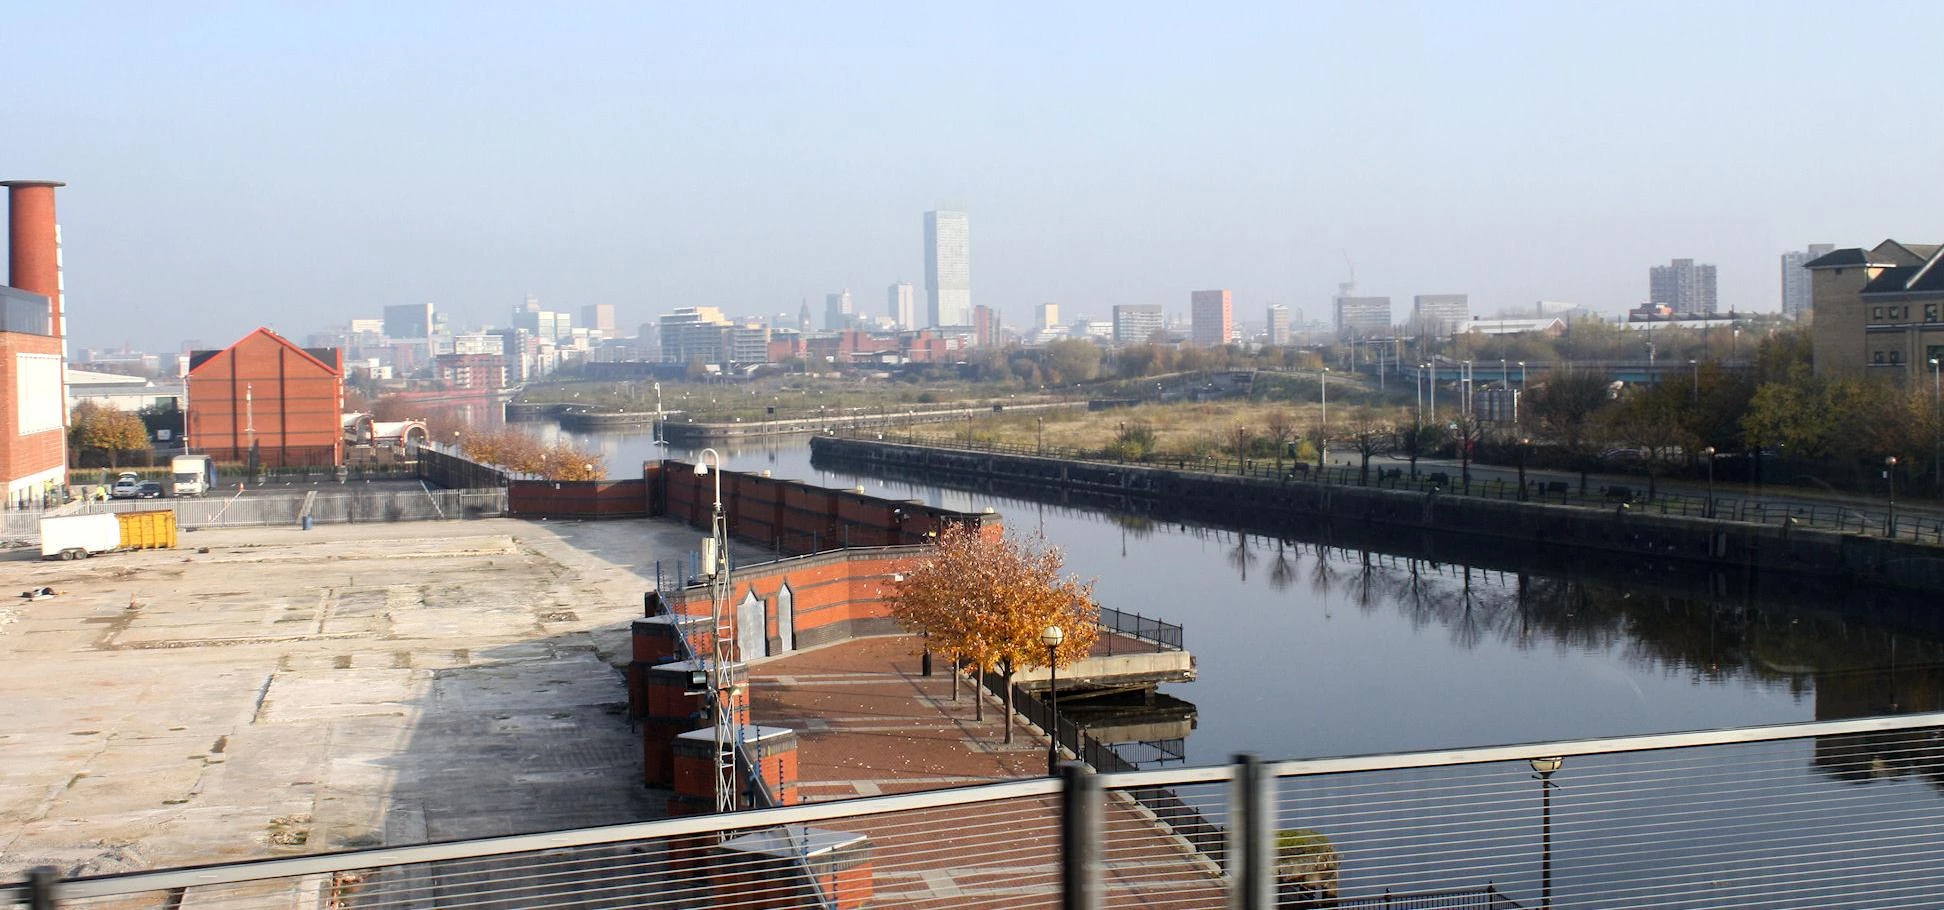 Manchester viewed from the Metrolink at Ivy Wharf, Ordsall